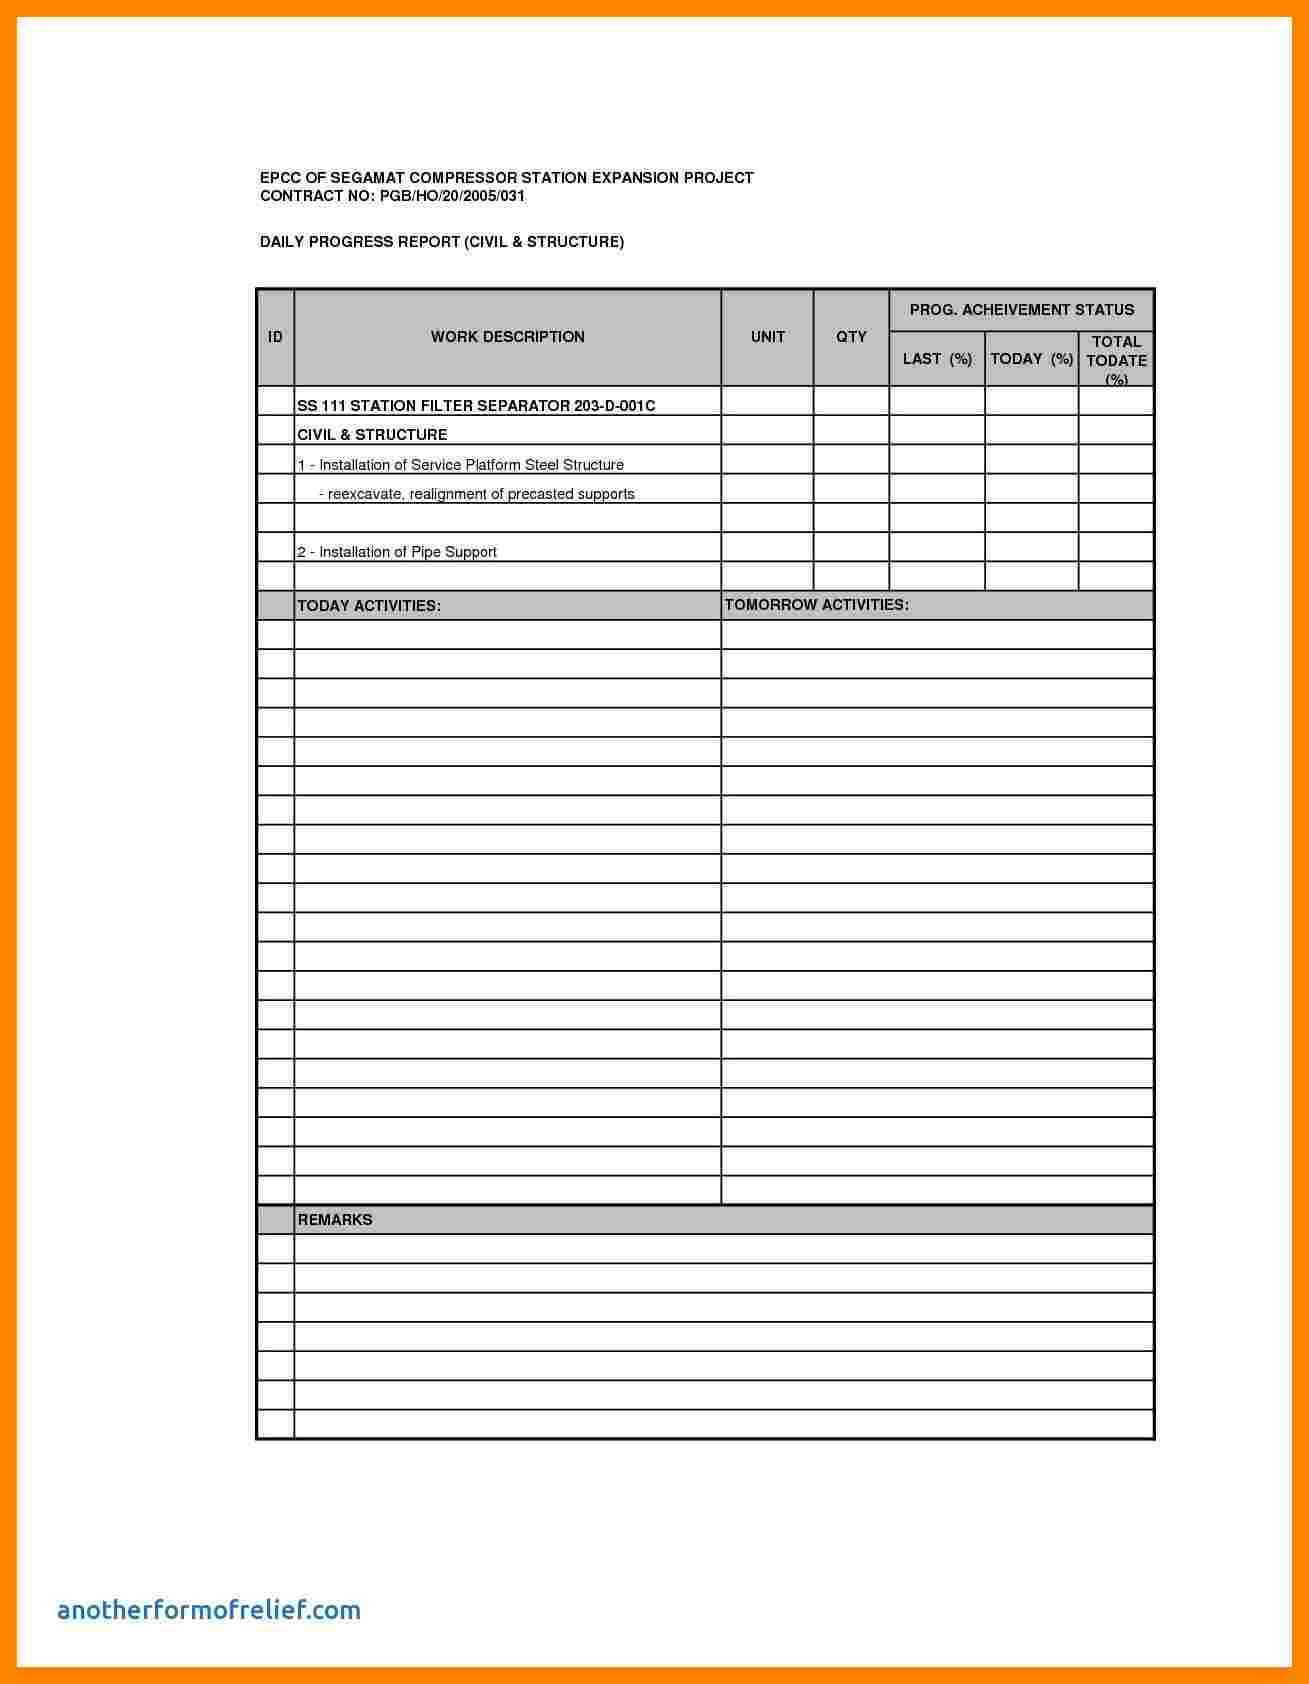 010 Daily Progress Report Format Construction Status Intended For Construction Daily Progress Report Template